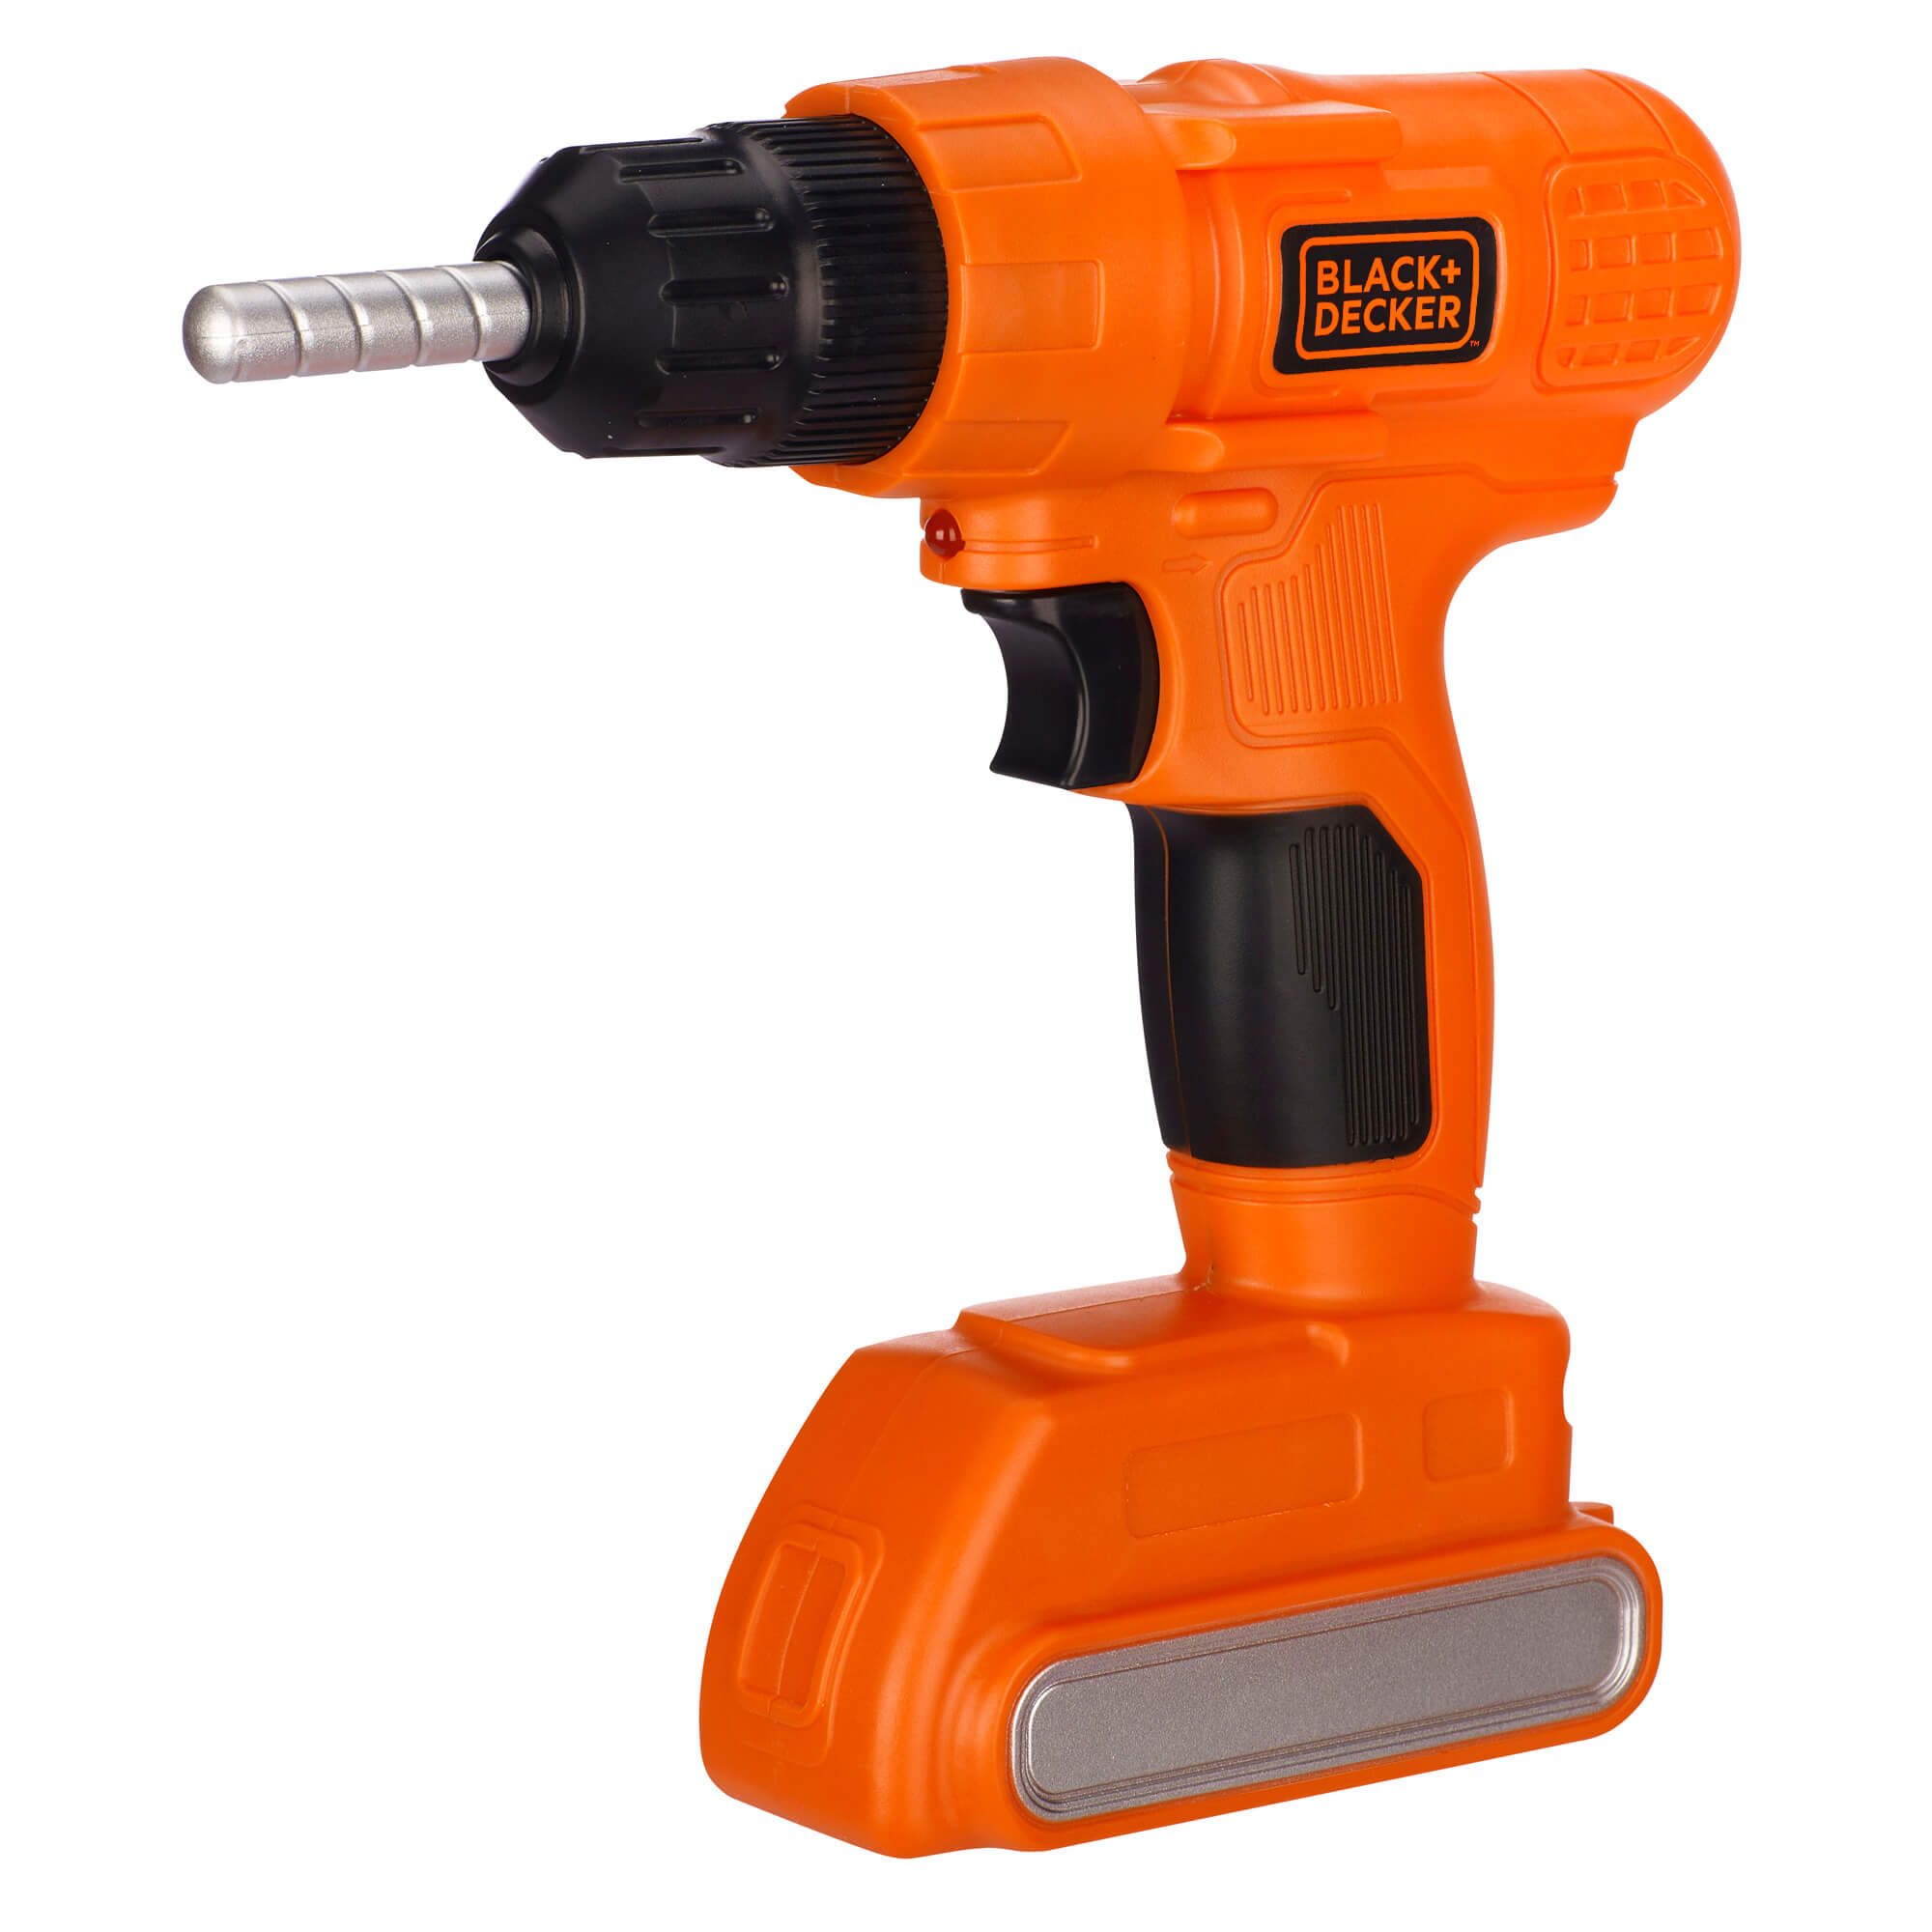 Junior Electronic Power Drill